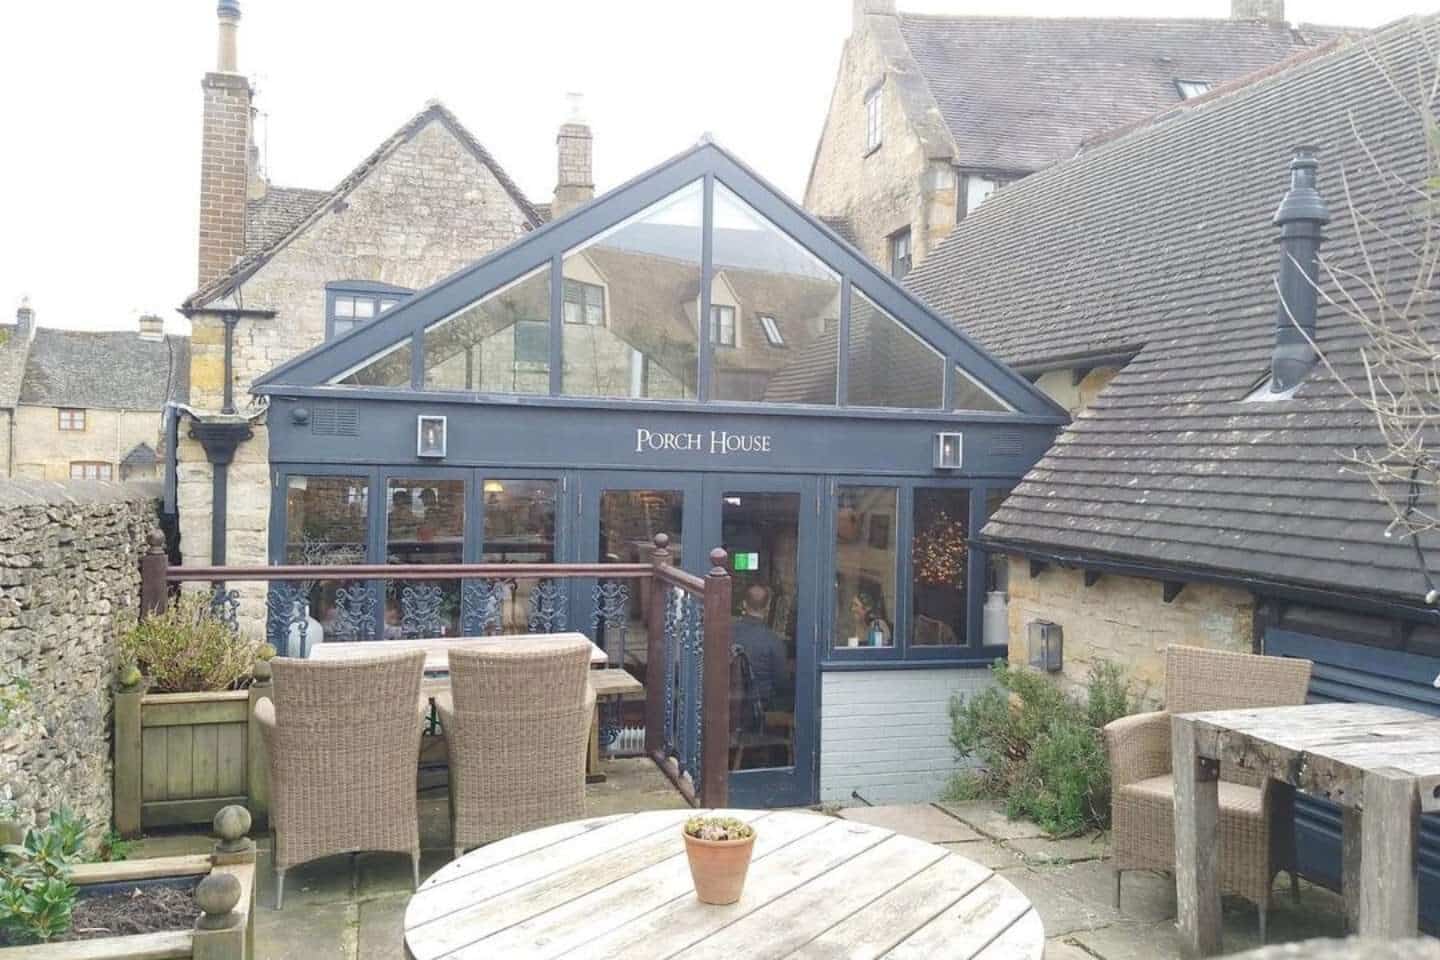 The Porch House Pub at Stow on the Wold